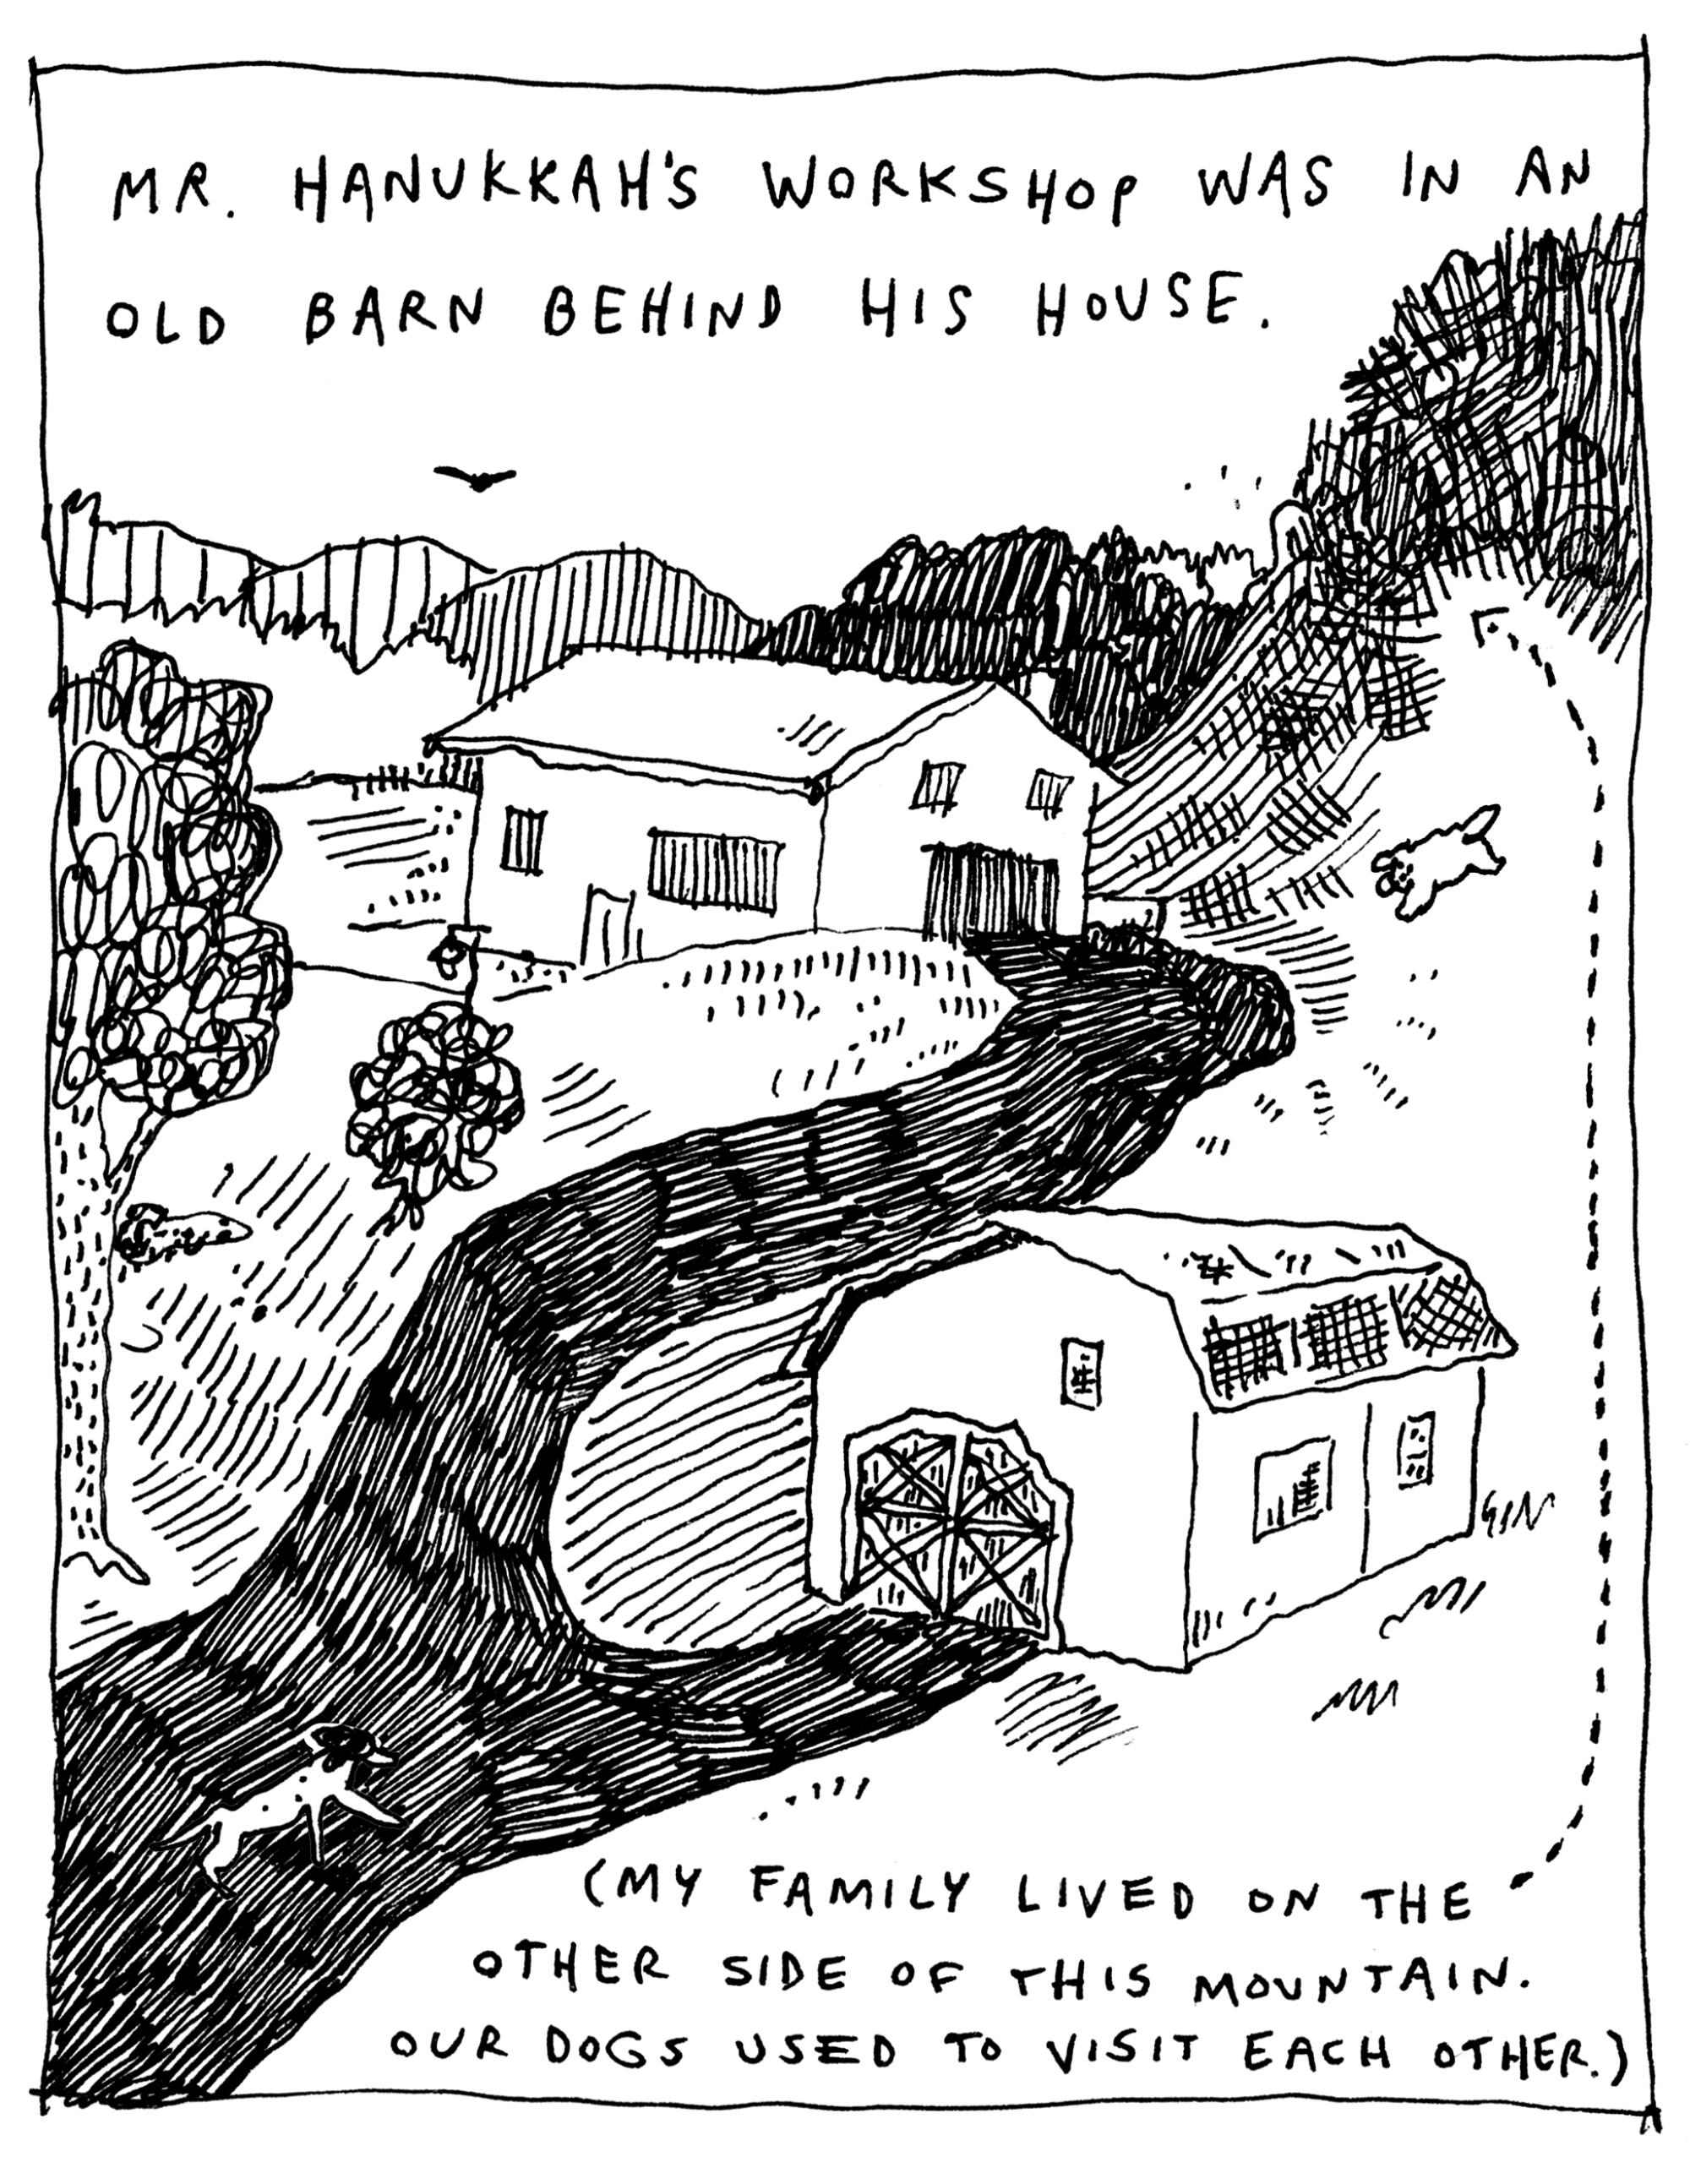 comic illustration of a barn with a house in the background. In the foreground a dog is on a road.